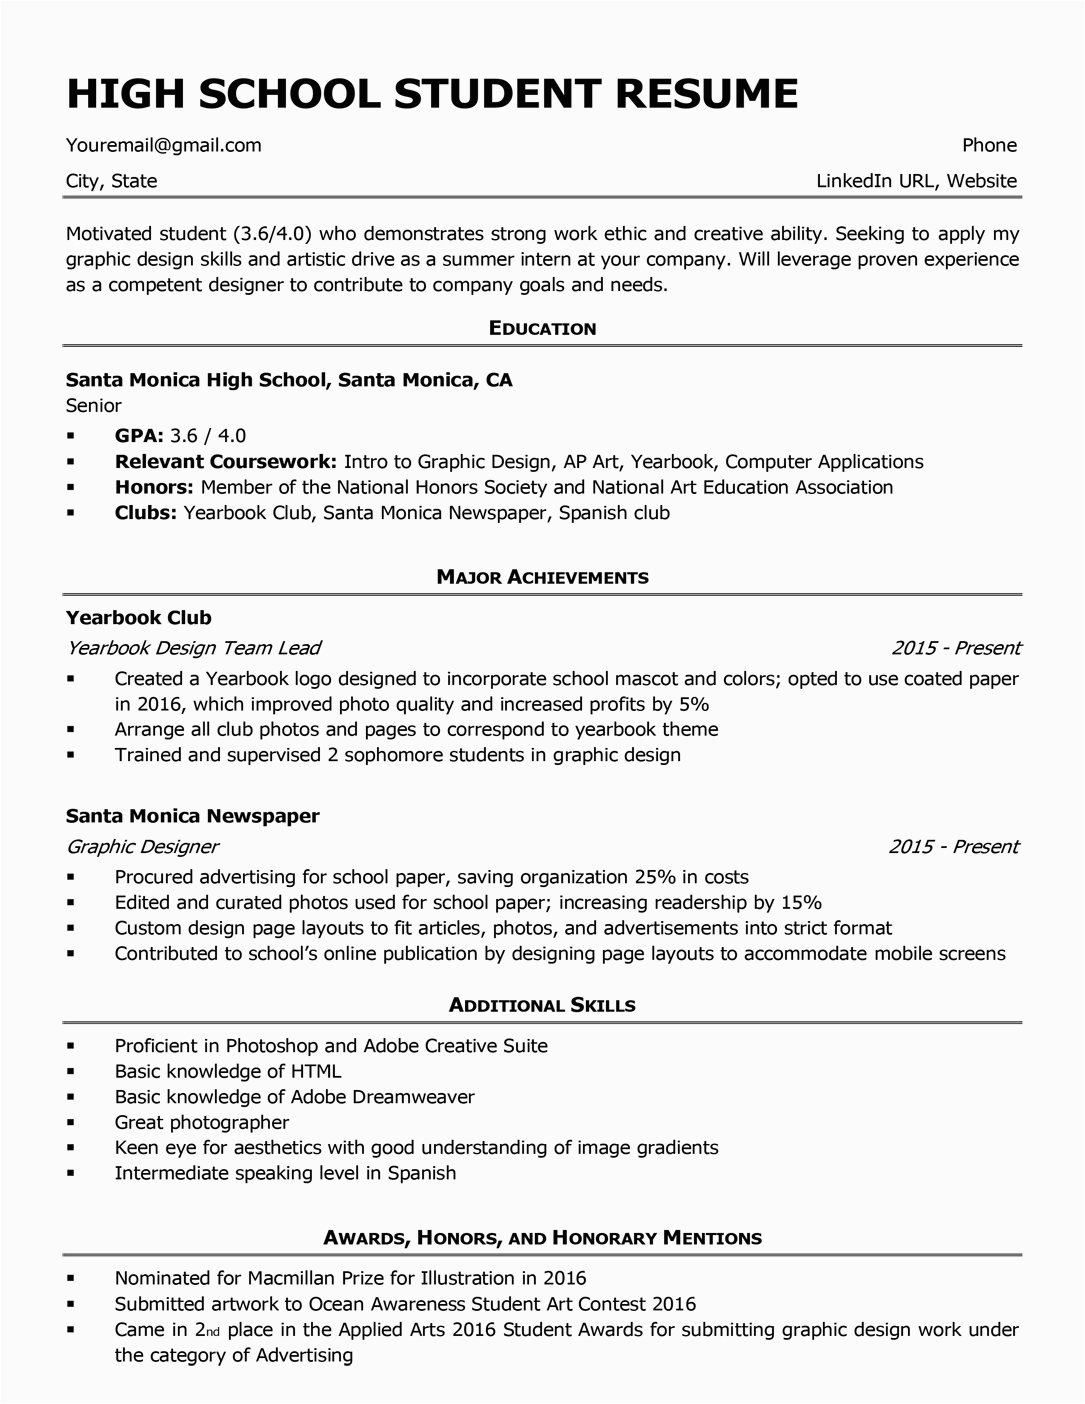 Resume Samples for A High School Student High School Resume Template & Writing Tips